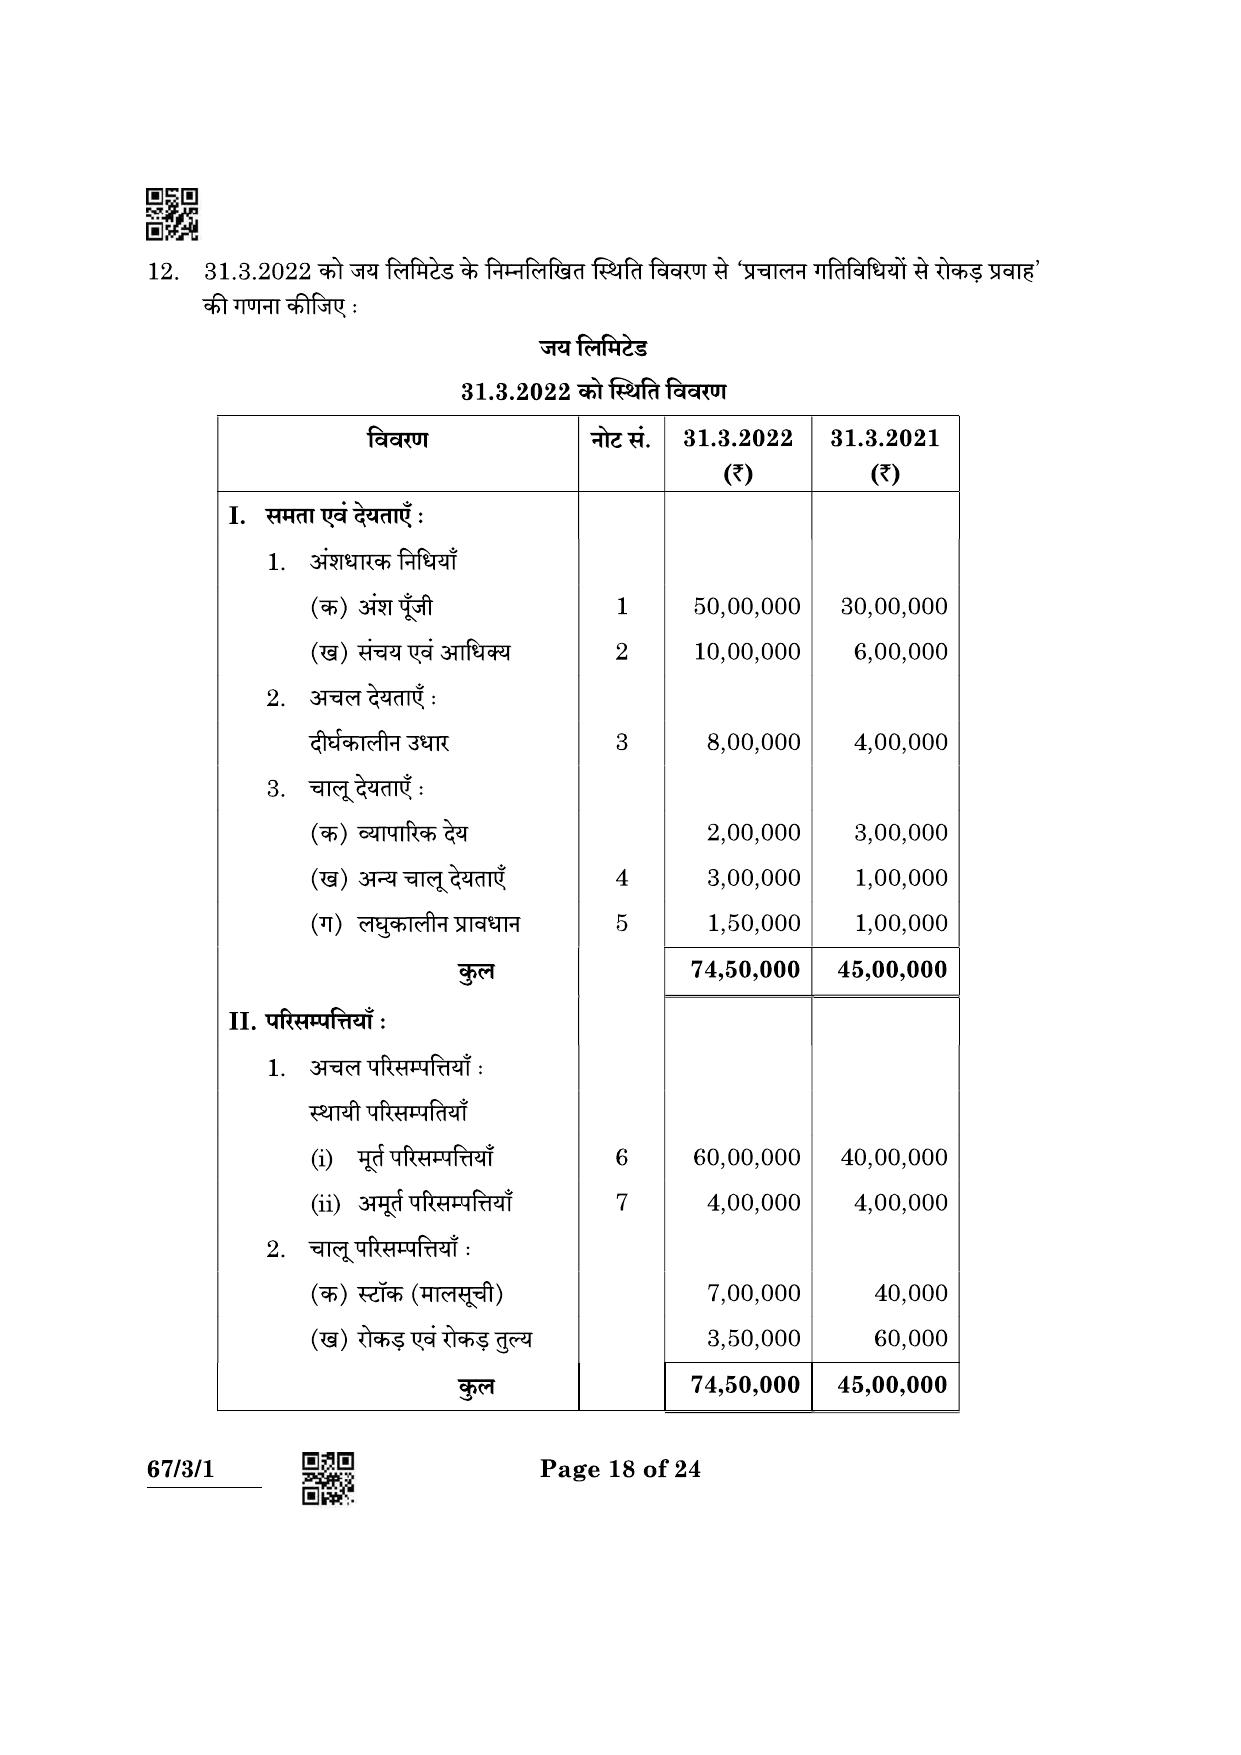 CBSE Class 12 67-3-1 Accountancy 2022 Question Paper - Page 18